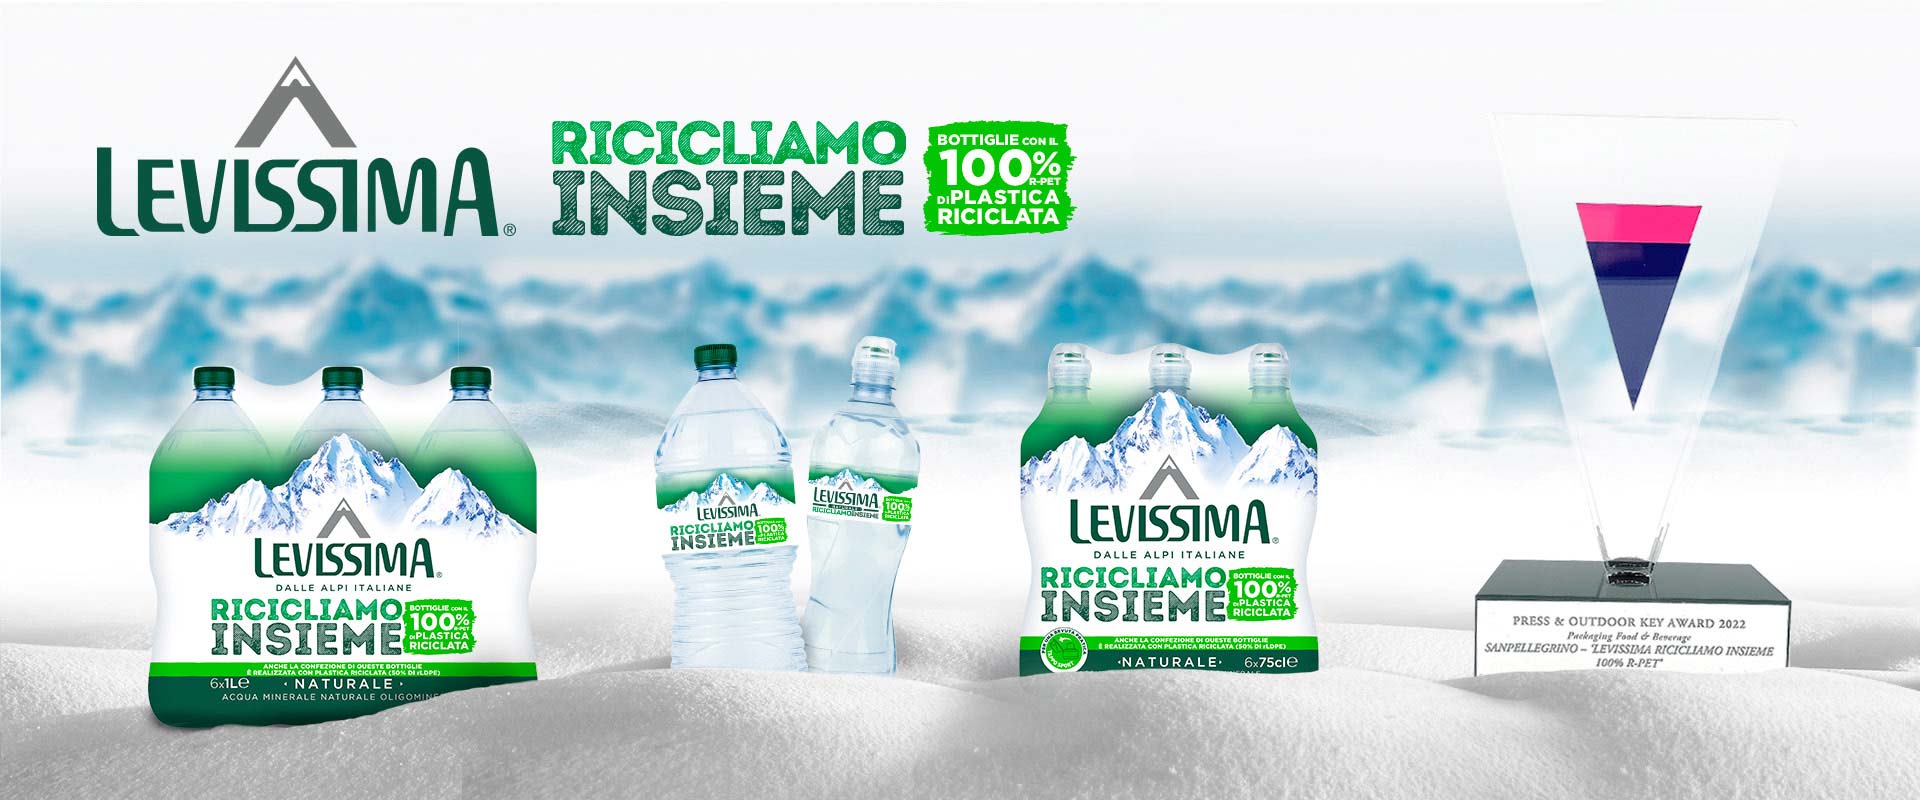 The sustainability project “Ricicliamo Insieme” (Let’s recycle together) for Levissima wins the 2022 Key Award in the packaging category thanks to the label and bundle redesign by ATC